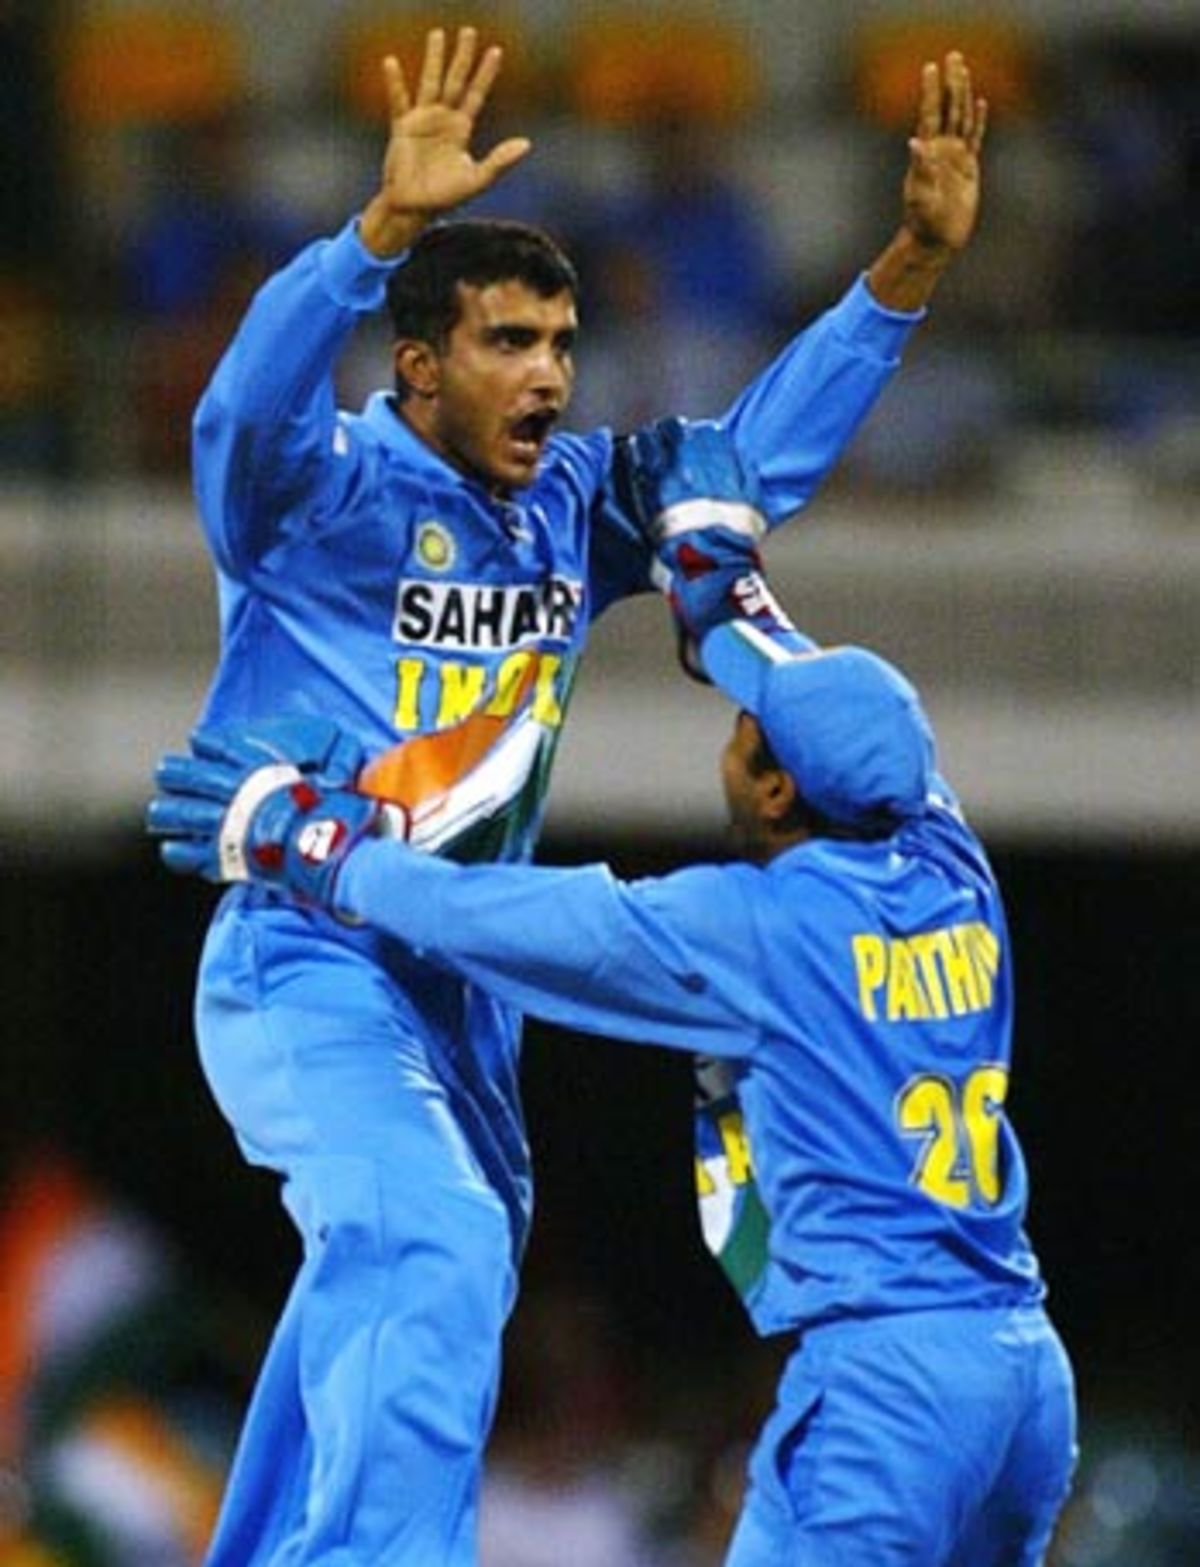 Sourav Ganguly's day on the field began well, he ran out Travis Friend ...